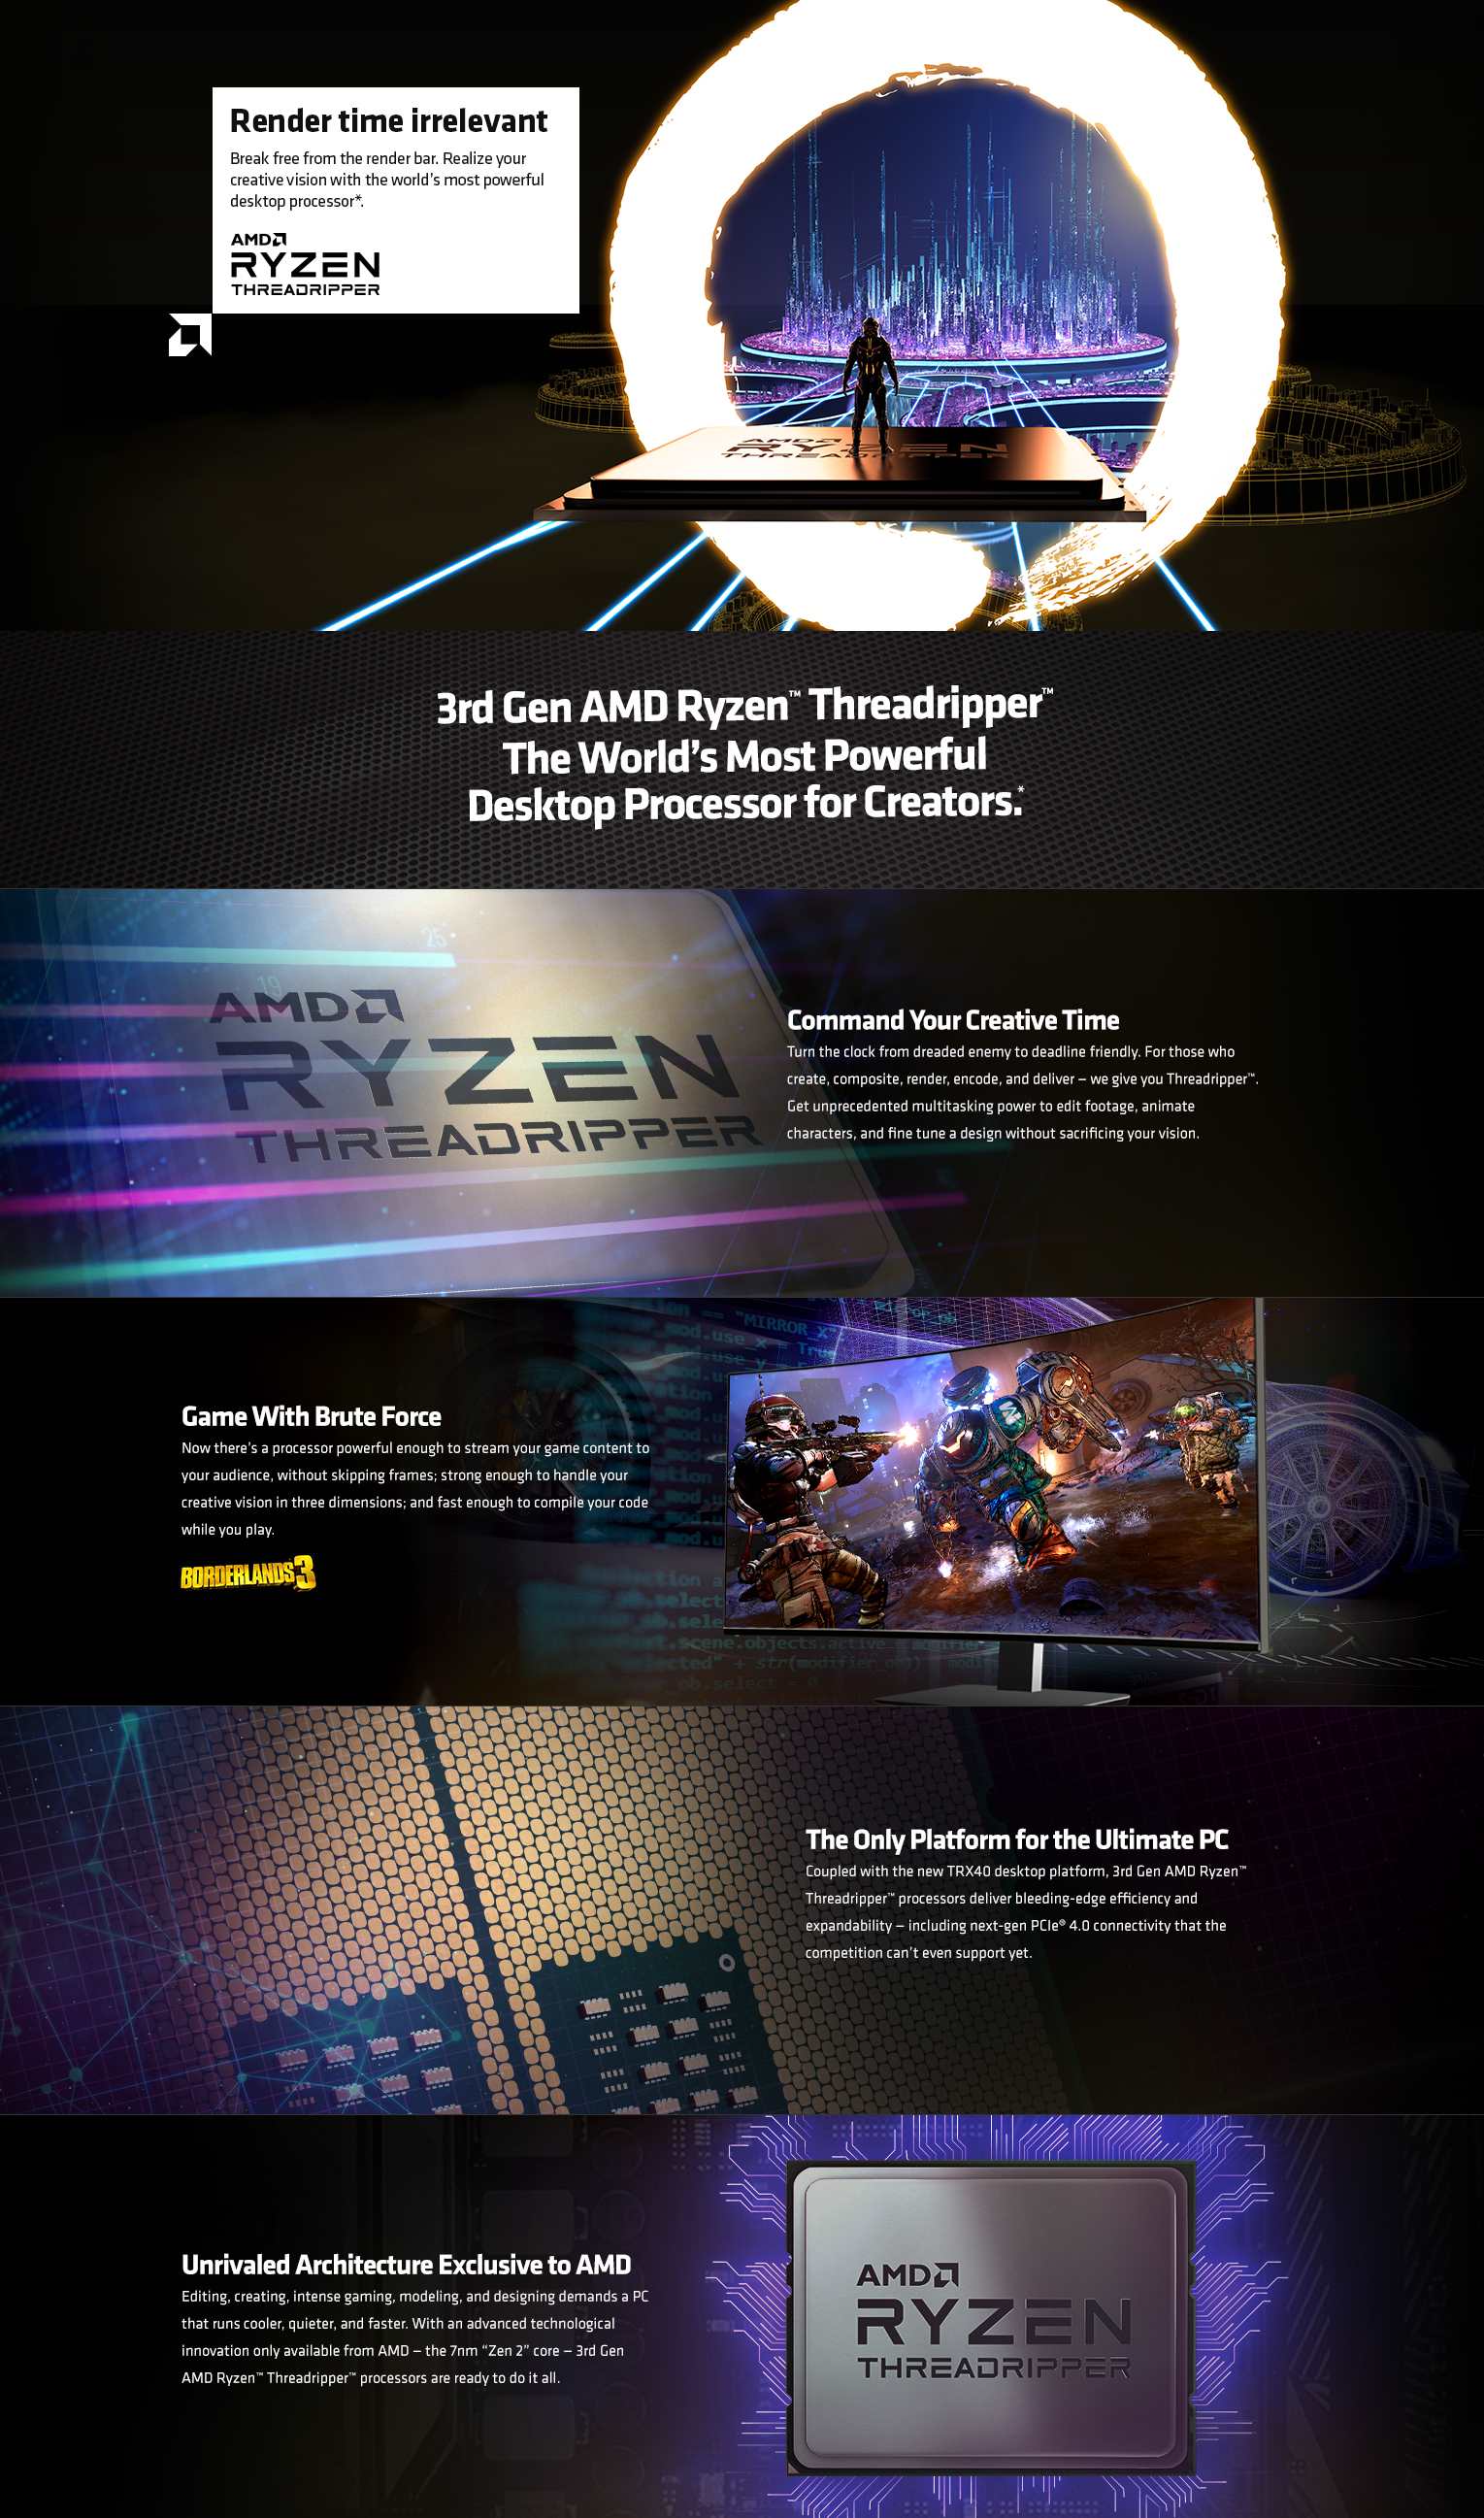 A large marketing image providing additional information about the product AMD Ryzen Threadripper 3960X 24 Core 48 Thread Up To 4.5Ghz 128MB sTRX4 Processor - No HSF Retail Box - Additional alt info not provided